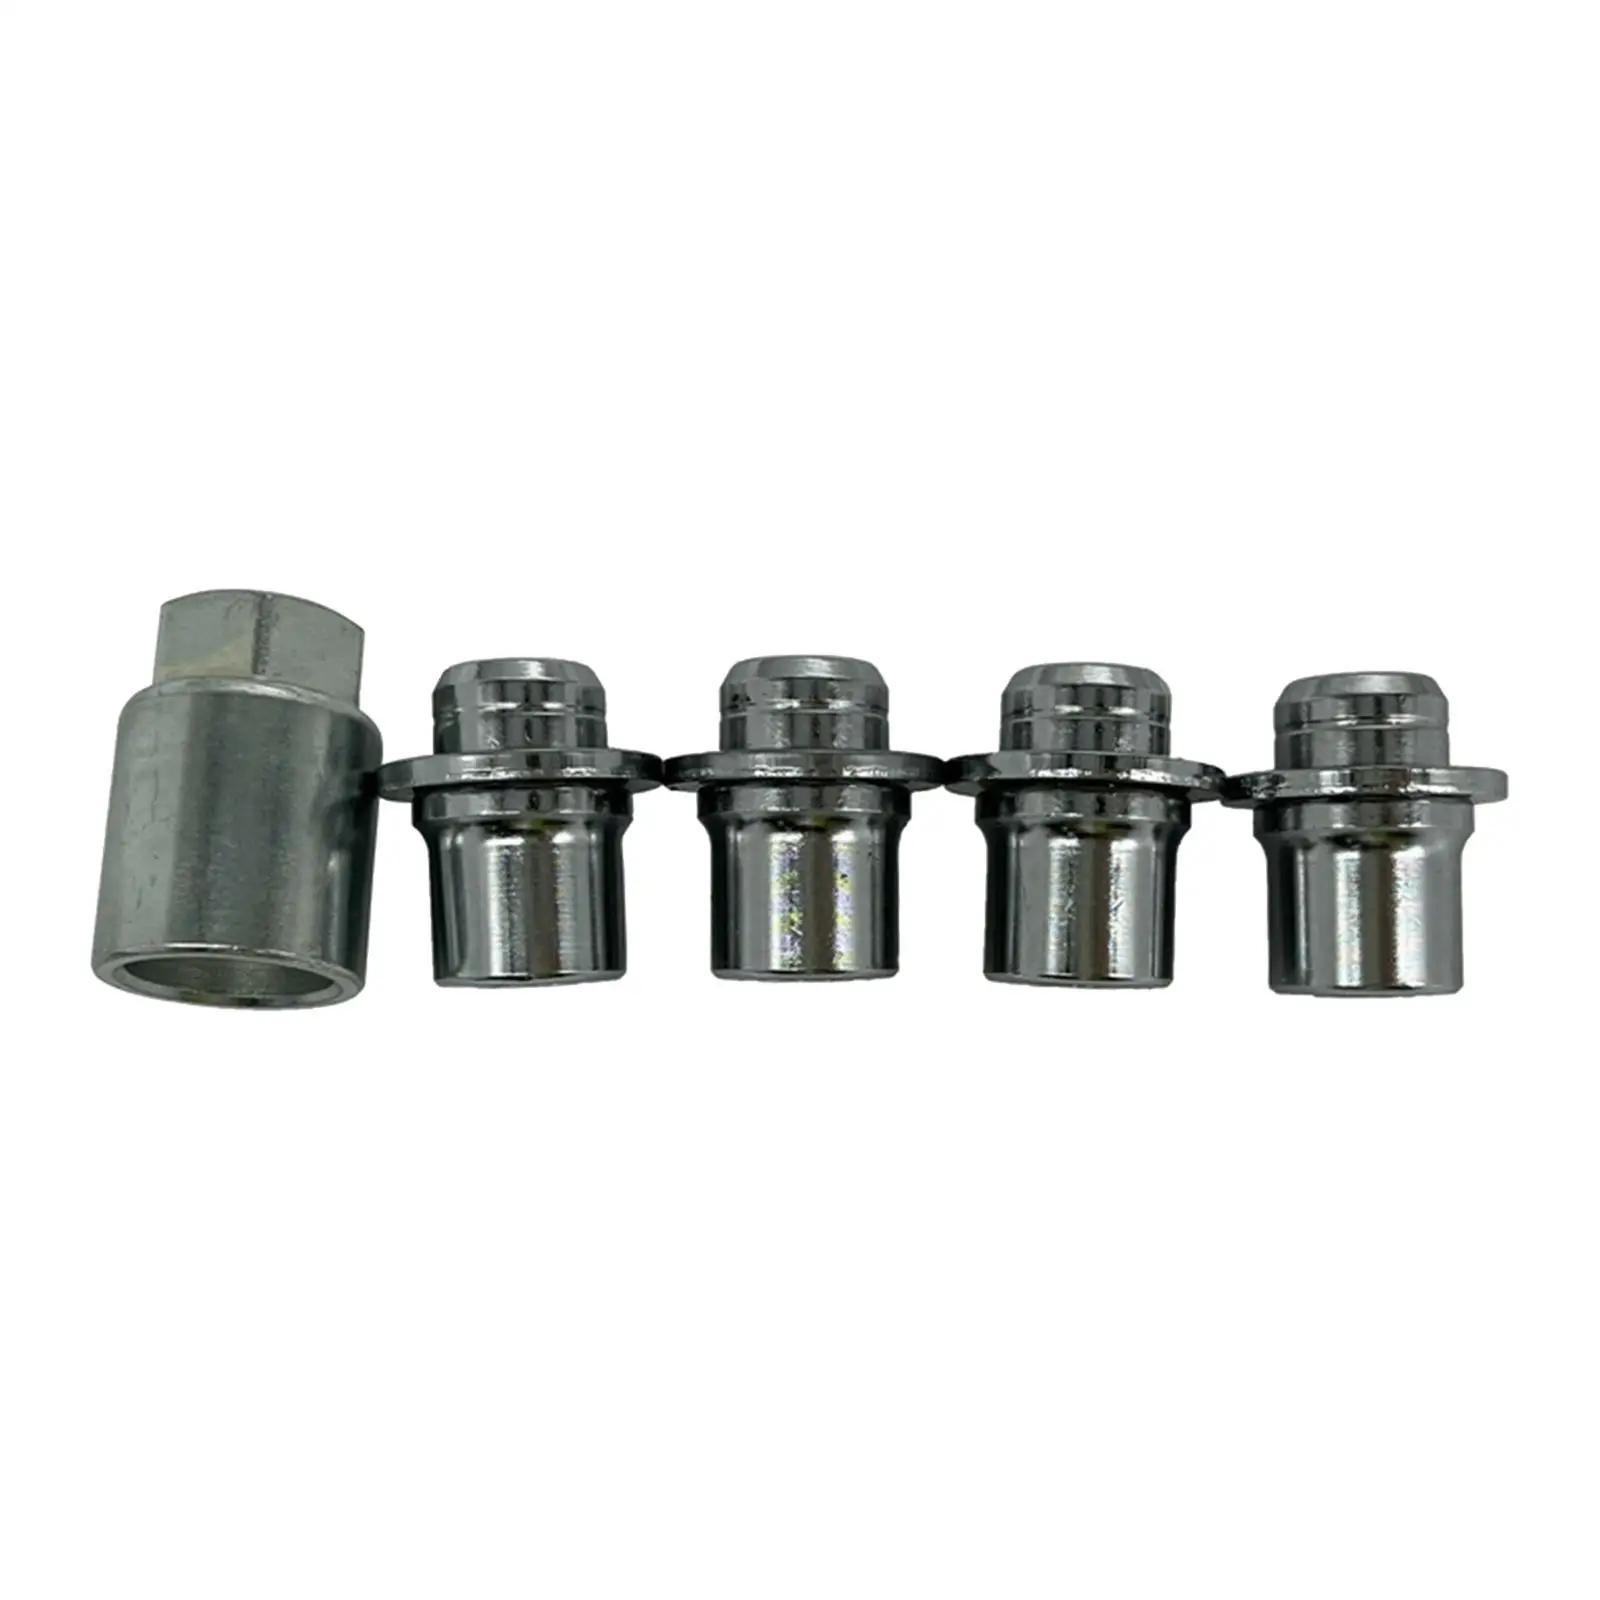 00276-00900 Replacement PT276-52041 Anti Theft Wheel Lock Lug Nuts for 2005-2022